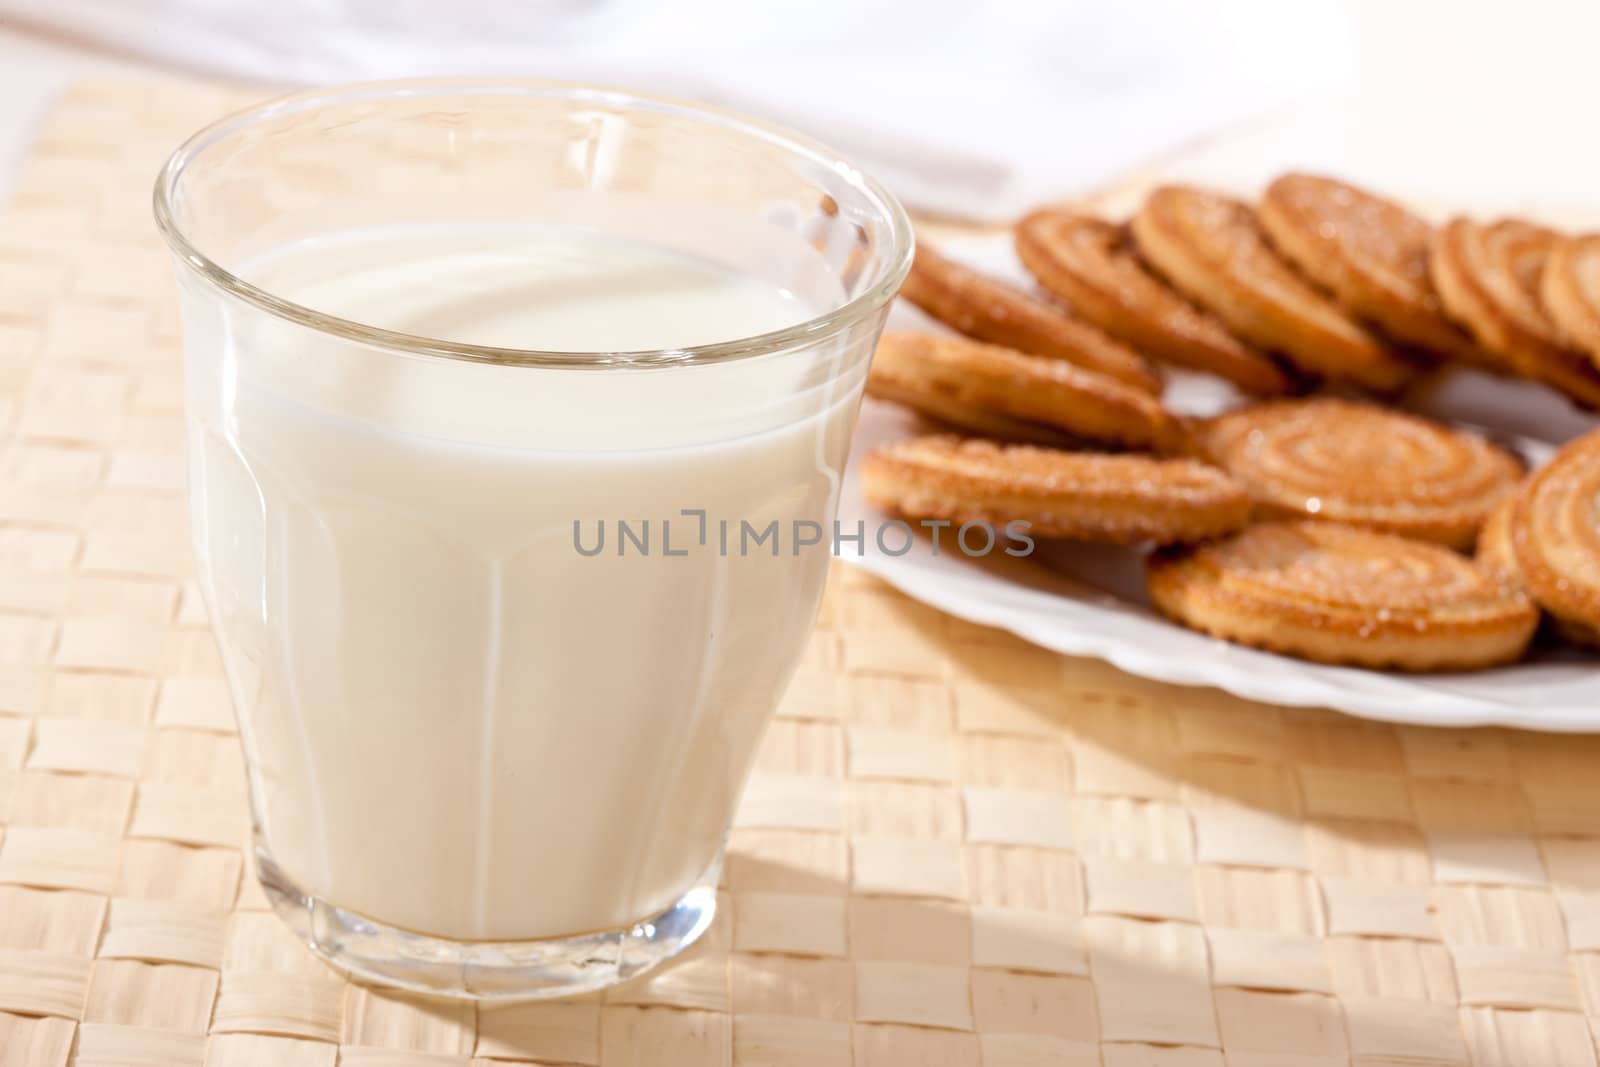 food series: glass of milk and pastry